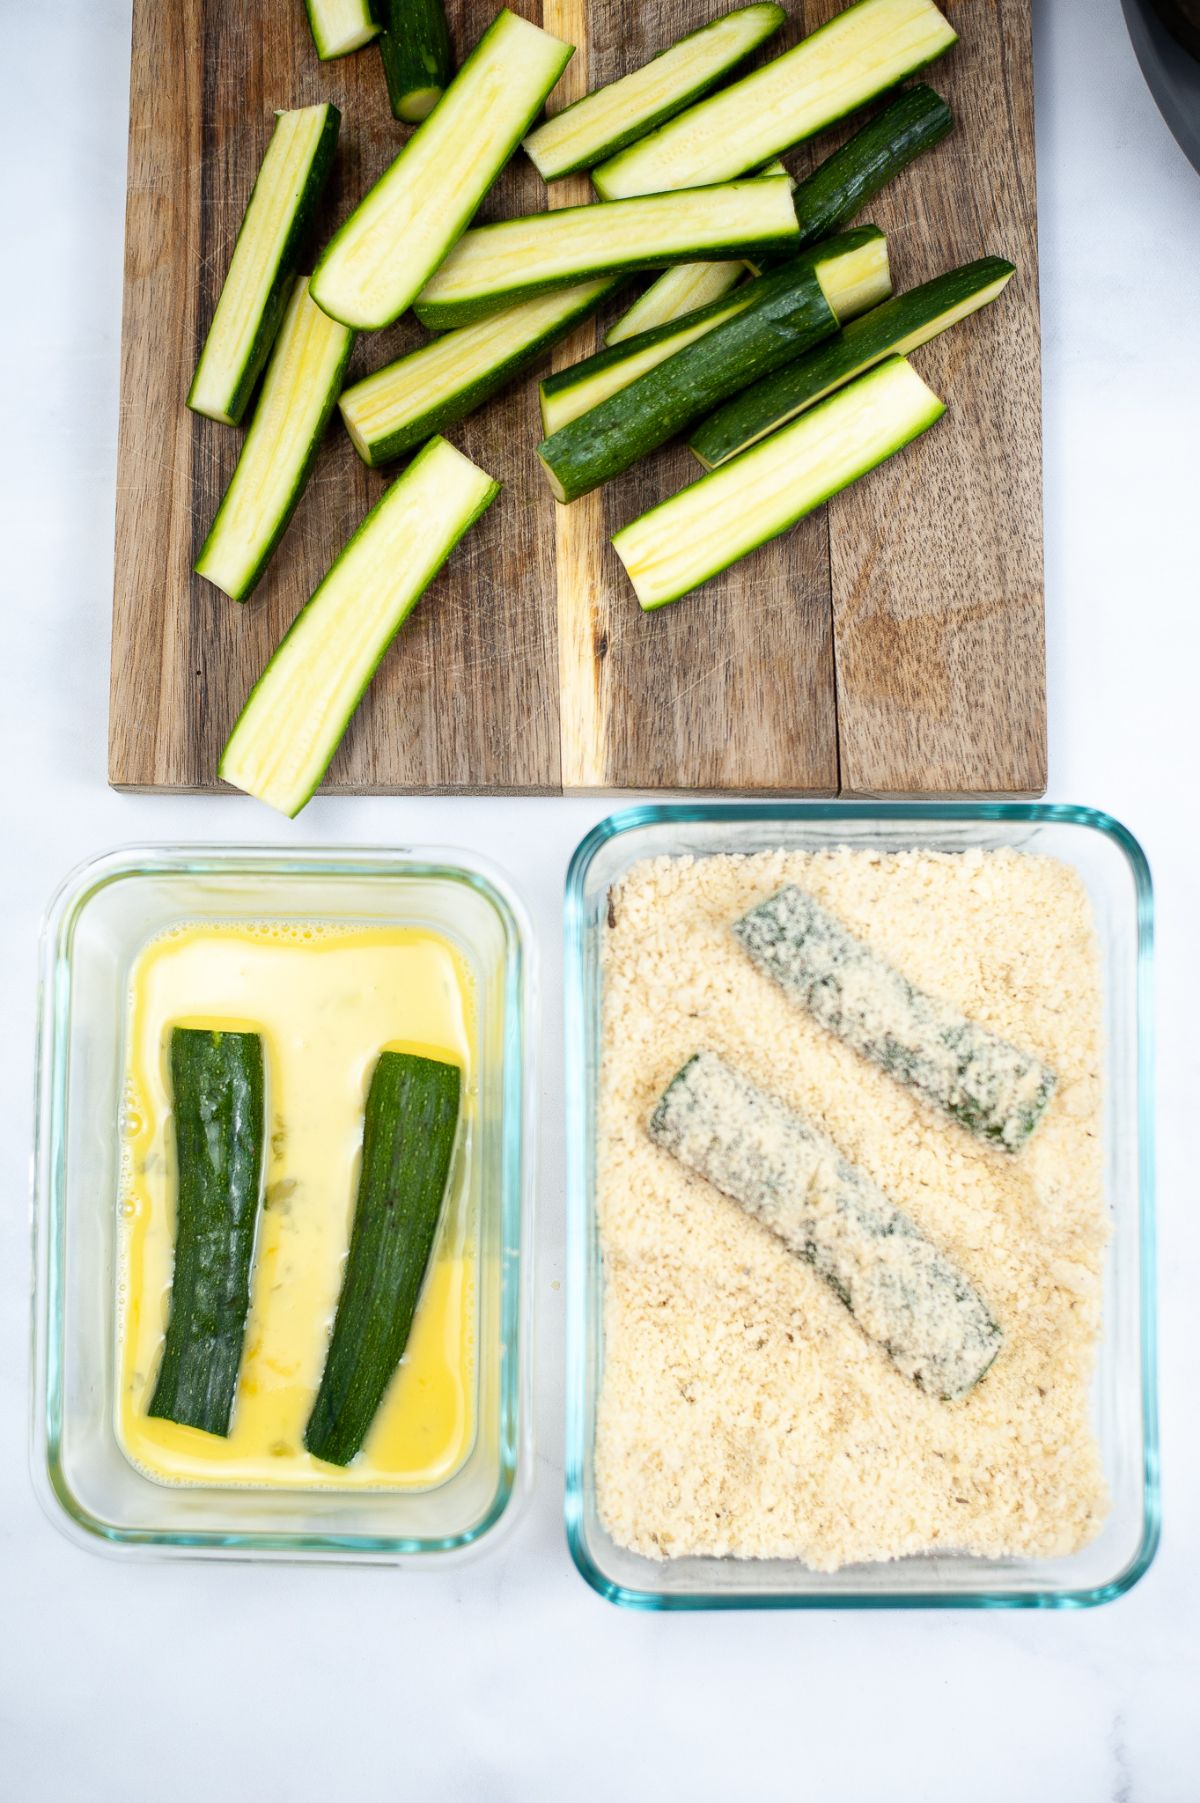 An image showing the first 3 steps in making Air Fryer Zucchini Fries. Sliced Zucchinis on a wooden chopping board, two Zucchinis dredged in eggs, and another two Zucchinis dredged in the breading mix.